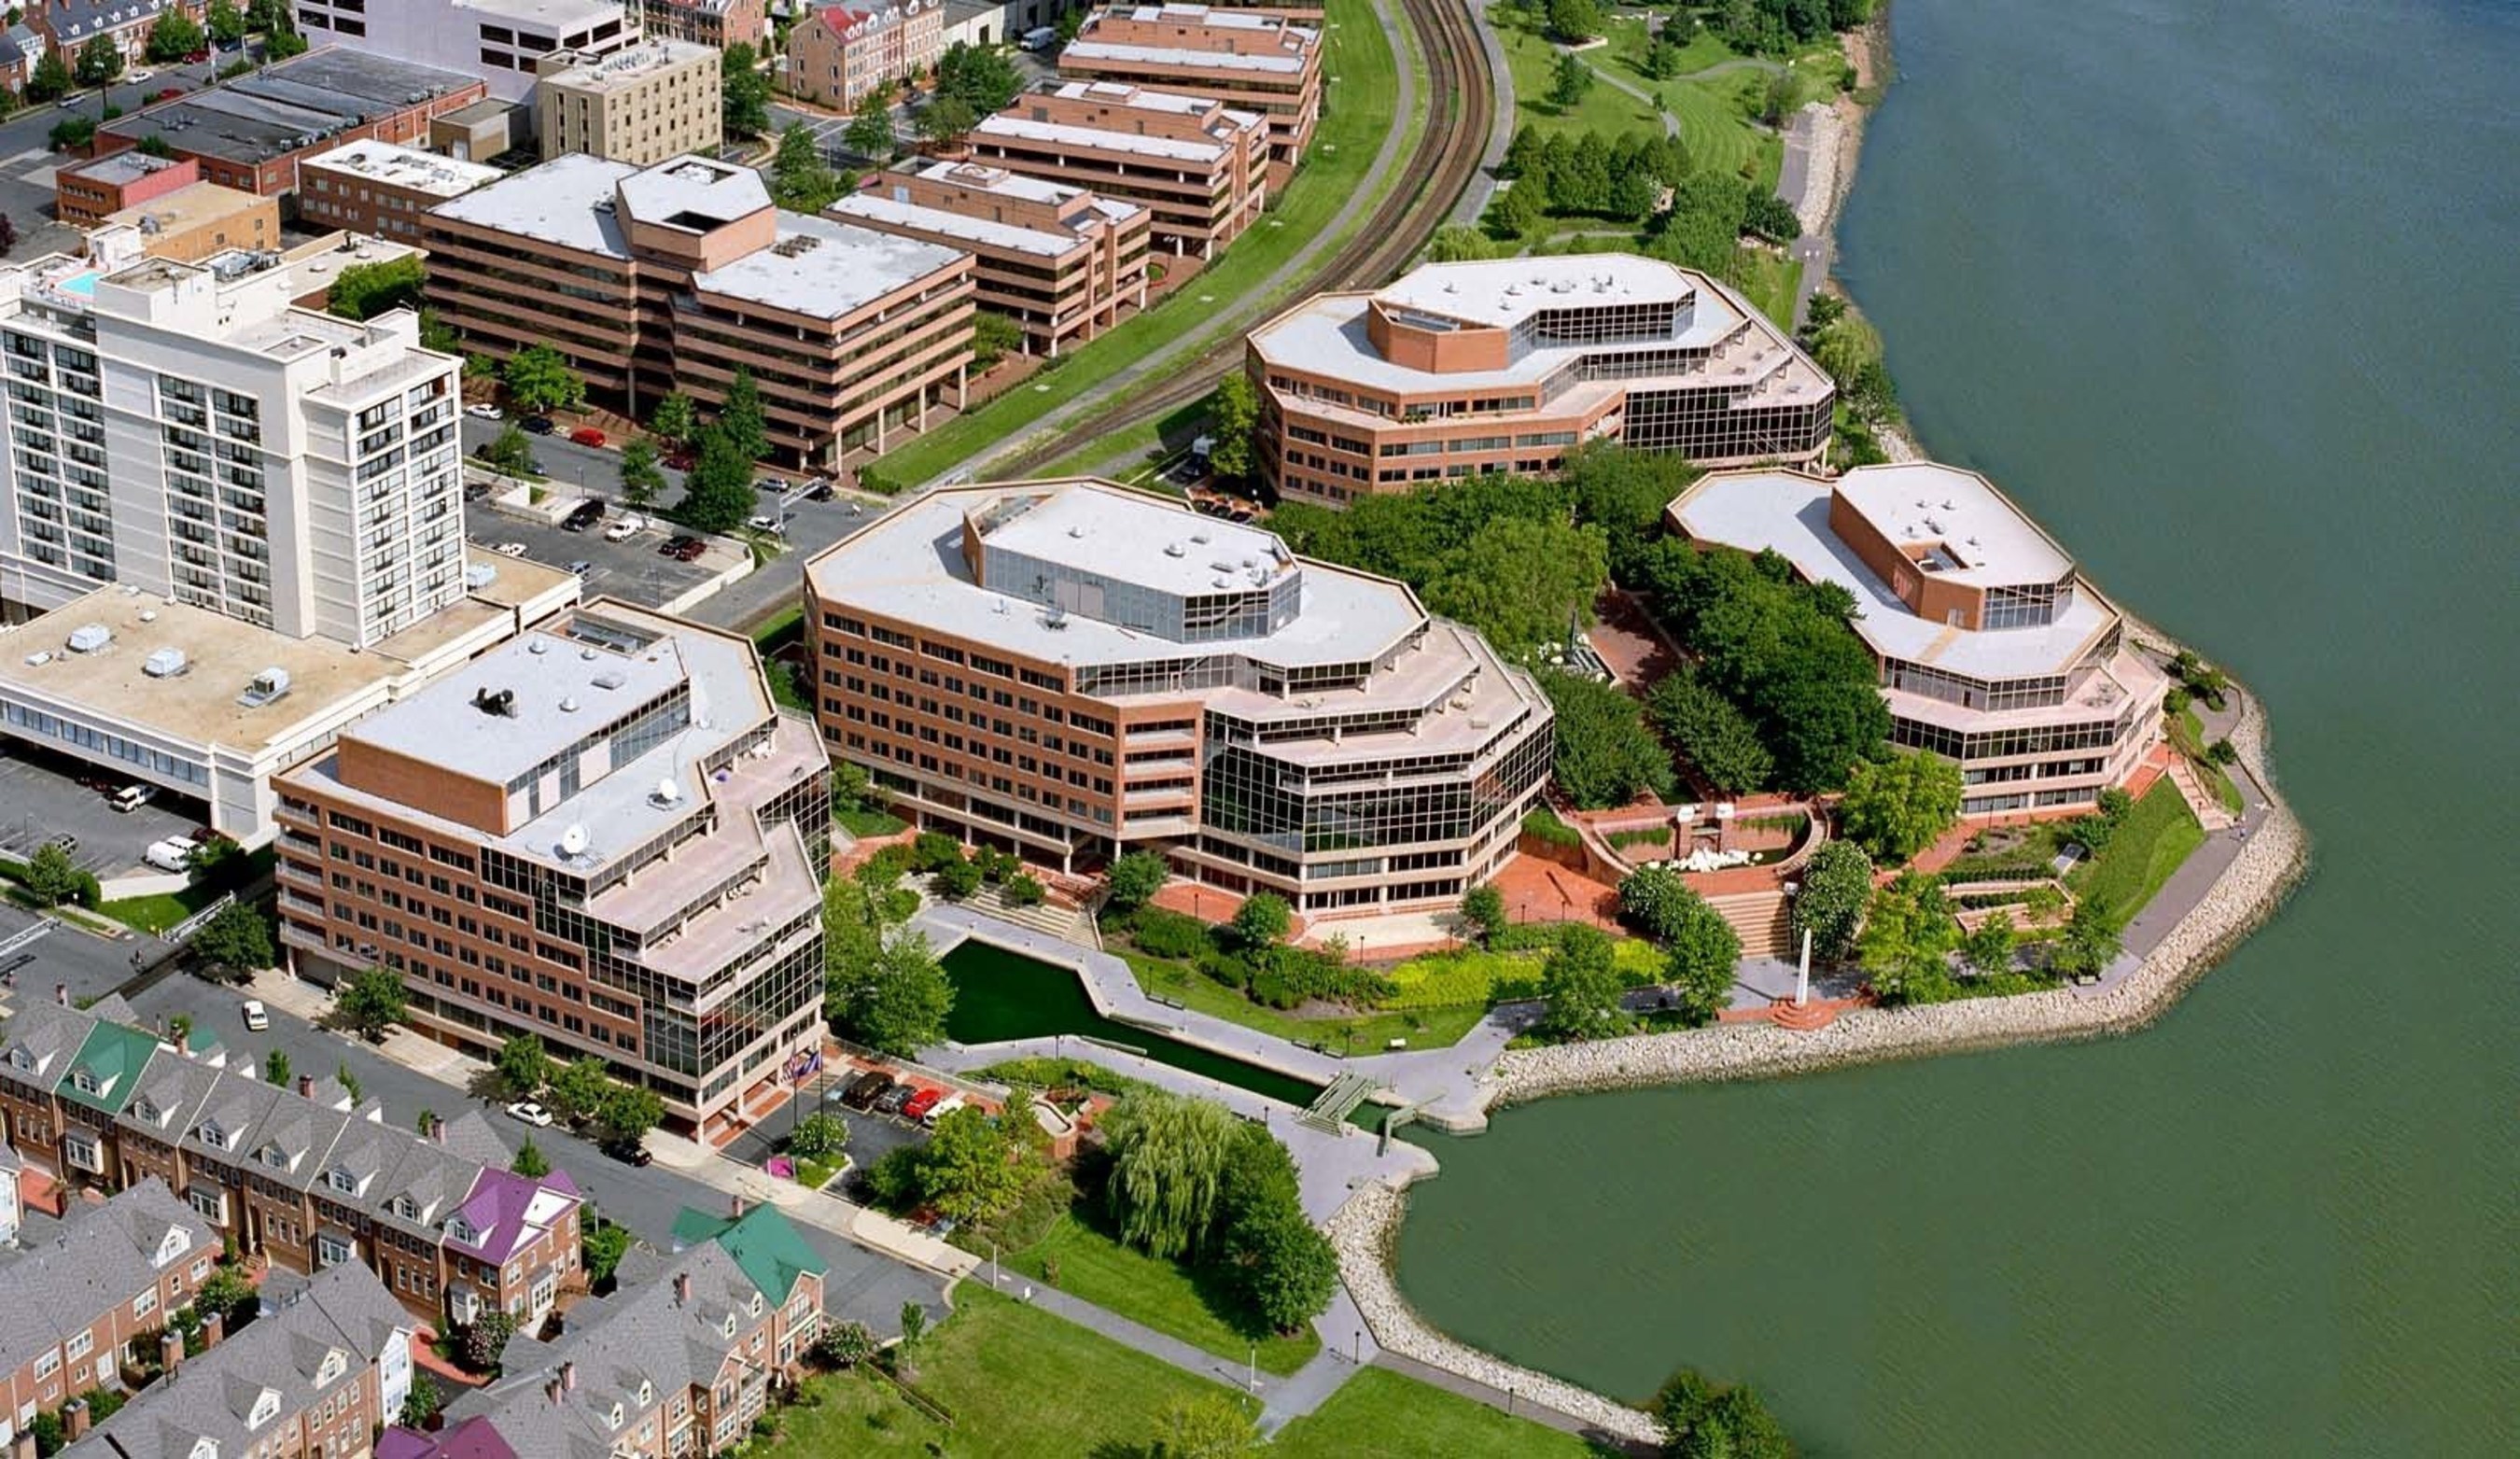 Investcorp, a leading provider and manager of alternative investment products, announced today that its U.S. based real estate arm, in partnership with American Real Estate Partners, has acquired the Canal Center, a 540,000 square foot Class A office complex located on the banks of the Potomac River in Alexandria, VA, minutes from downtown Washington, DC.